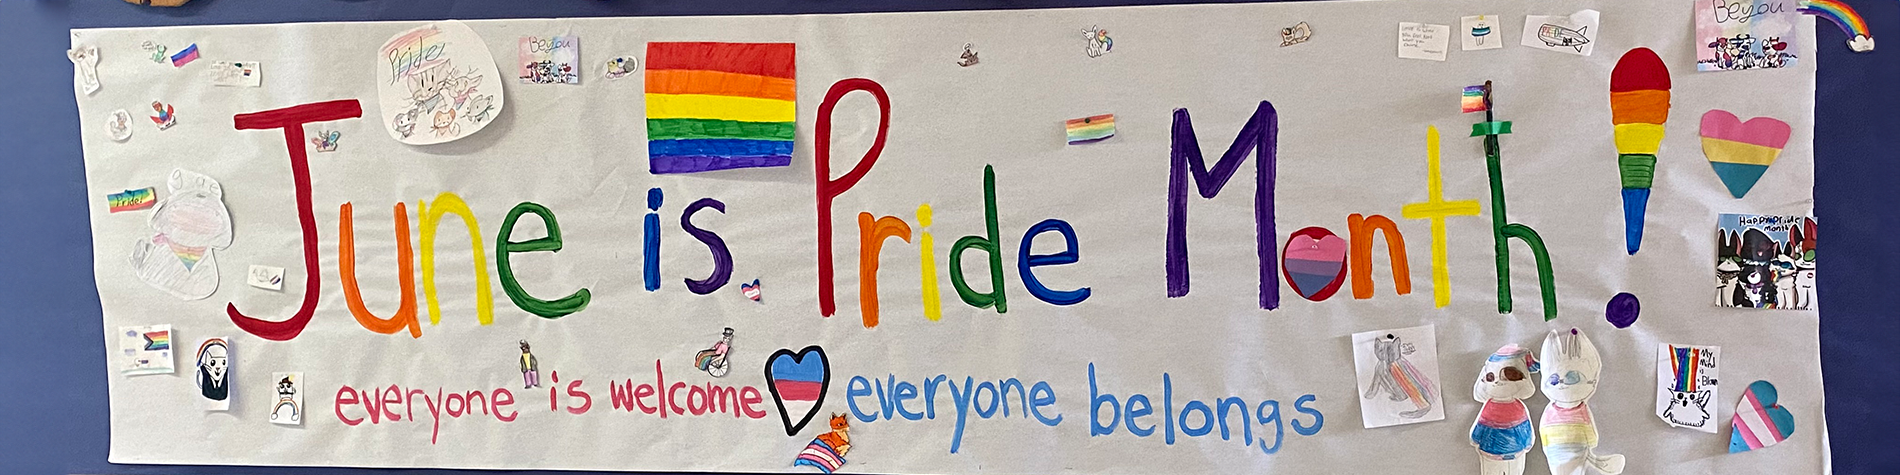 <p class="slider-title">Acknowledging Pride Month in the CBE </p><div class="banner-line"></div><p class="slider-subtitle">June marks the beginning of Pride Month, a time to recognize the pursuit of equality and rights for 2SLGBTQ+ individuals. </p> <a style="pointer-events:all" class=AEBannerMoreLink href="https://cbe.ab.ca/news-centre/Pages/acknowledging-pride-month-in-the-CBE-2024.aspx">Read More</a>